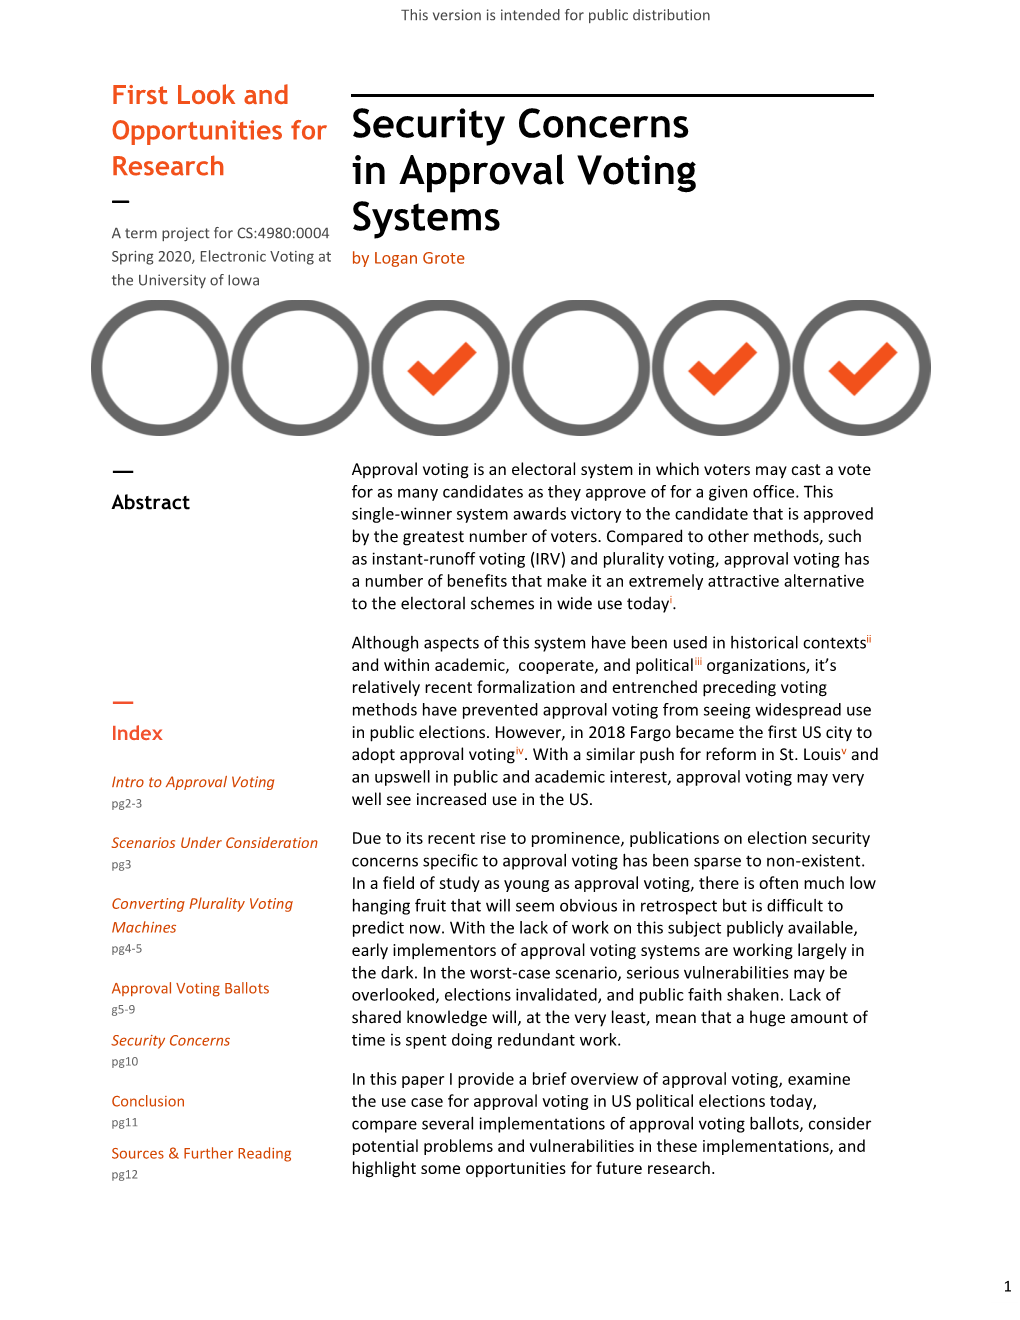 Security Concerns in Approval Voting Systems